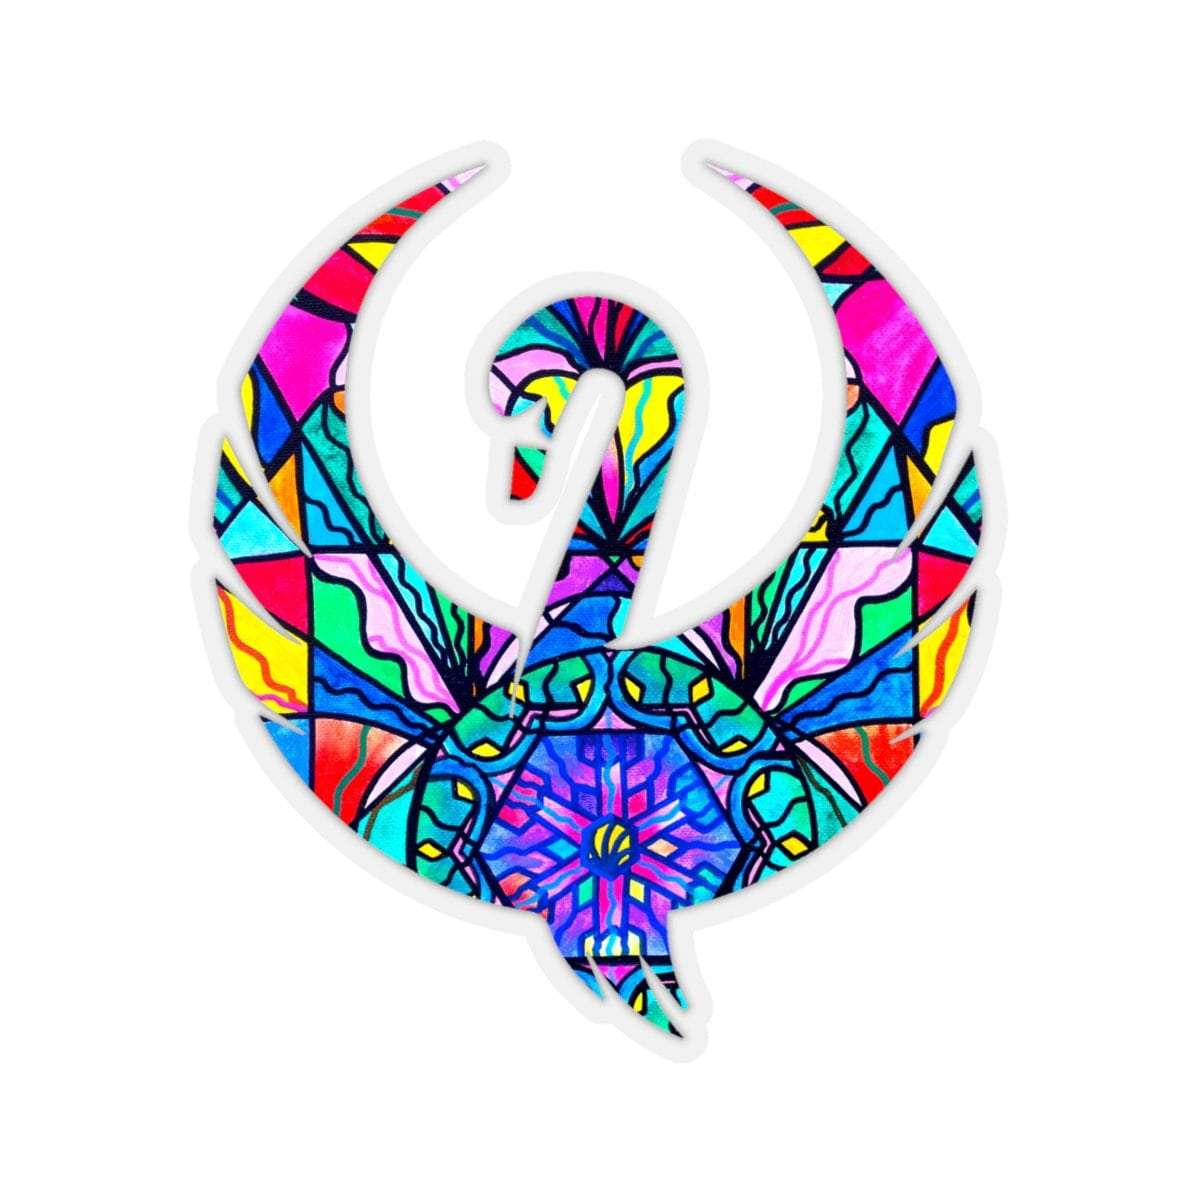 be-the-first-to-own-the-newest-anahata-heart-chakra-swan-stickers-supply_11.jpg